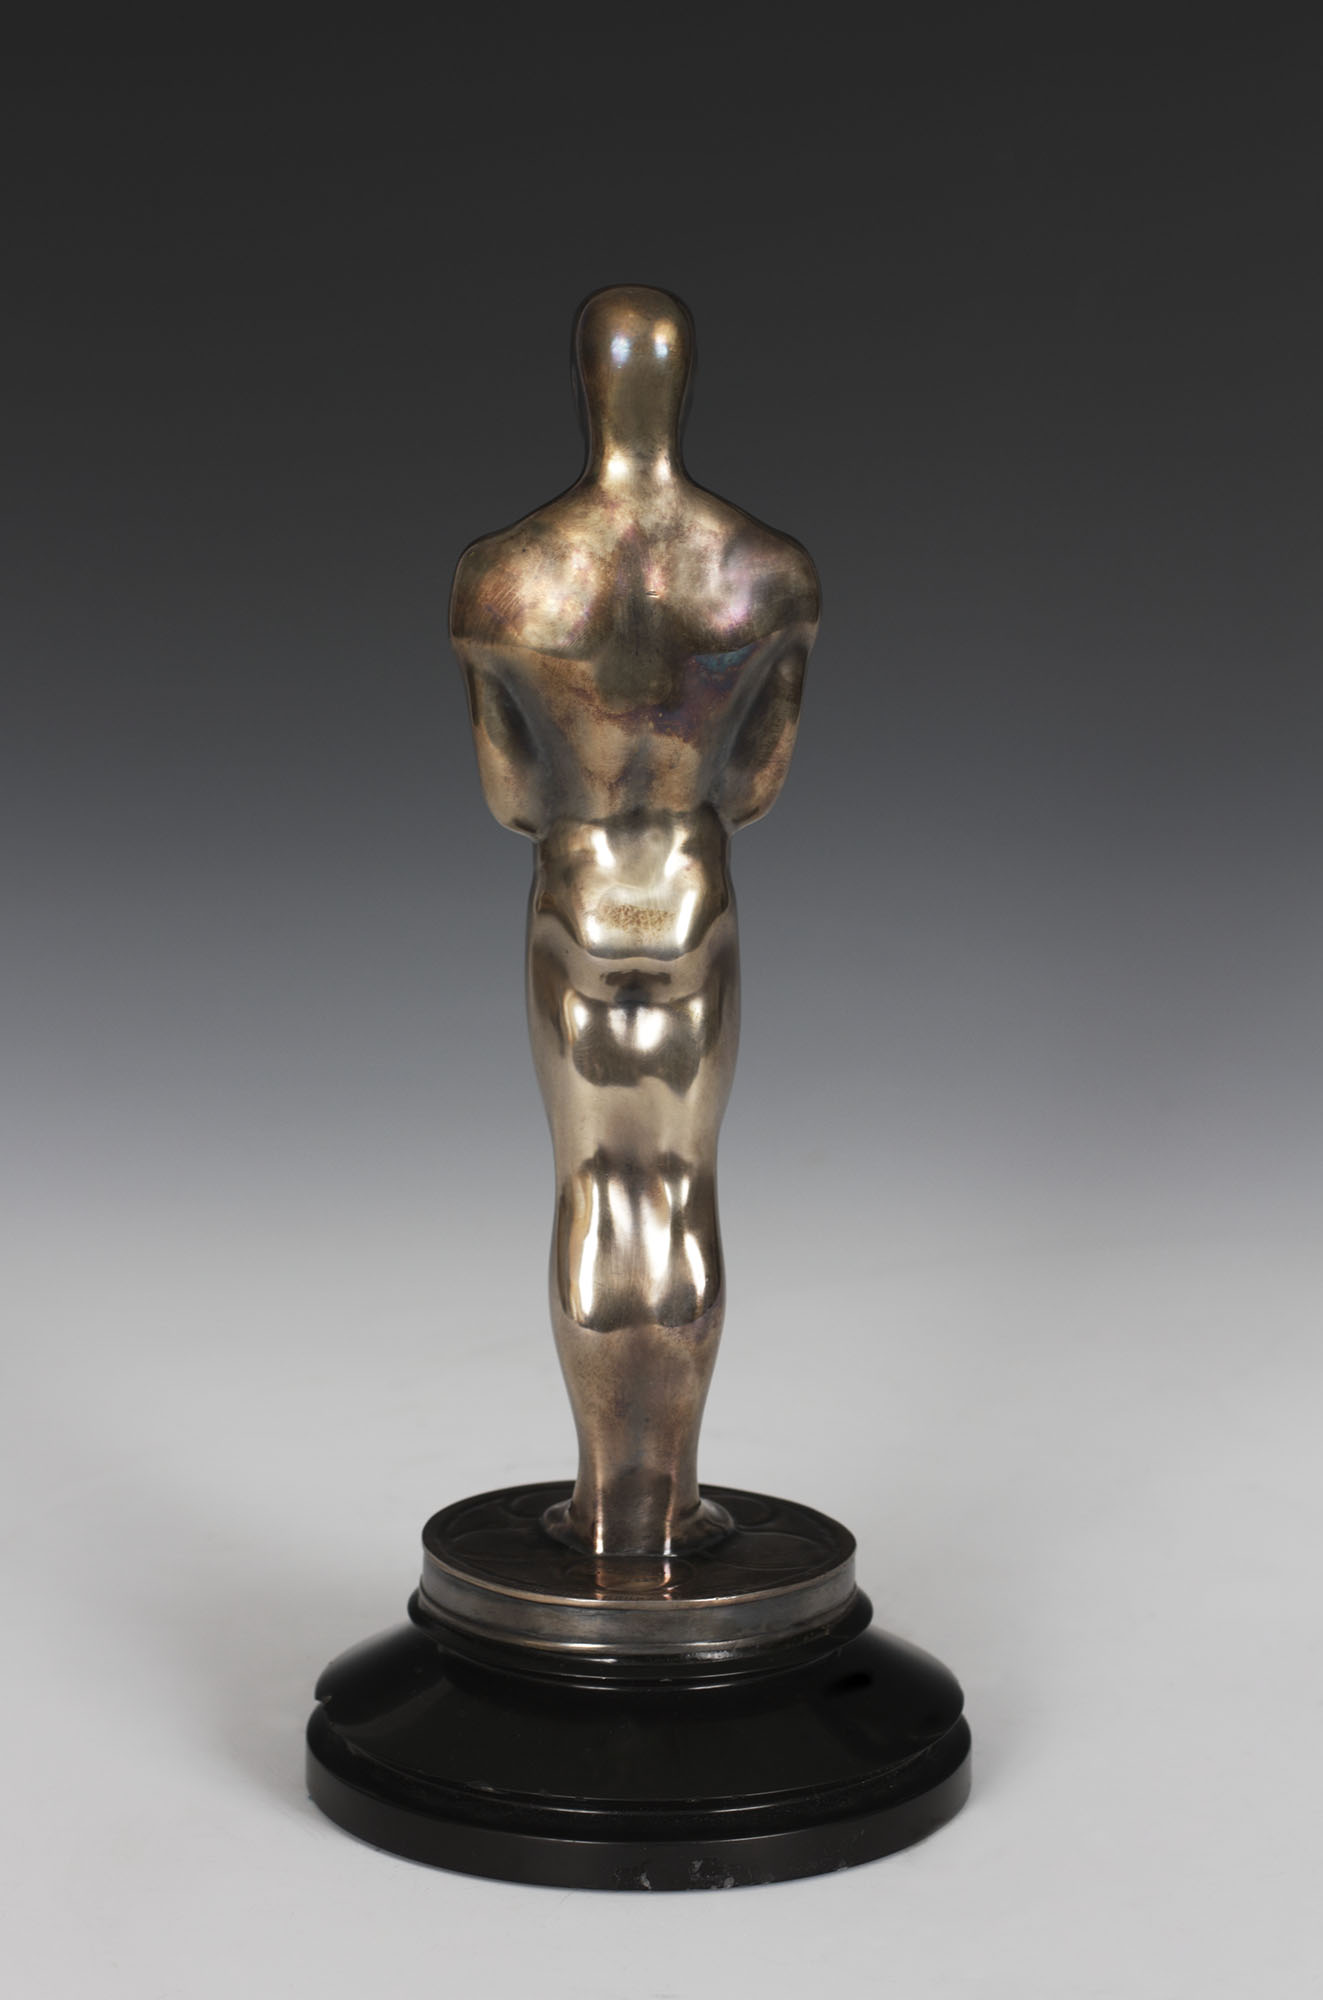 Academy can reclaim auctioned Oscar statuette for $10 - BBC News